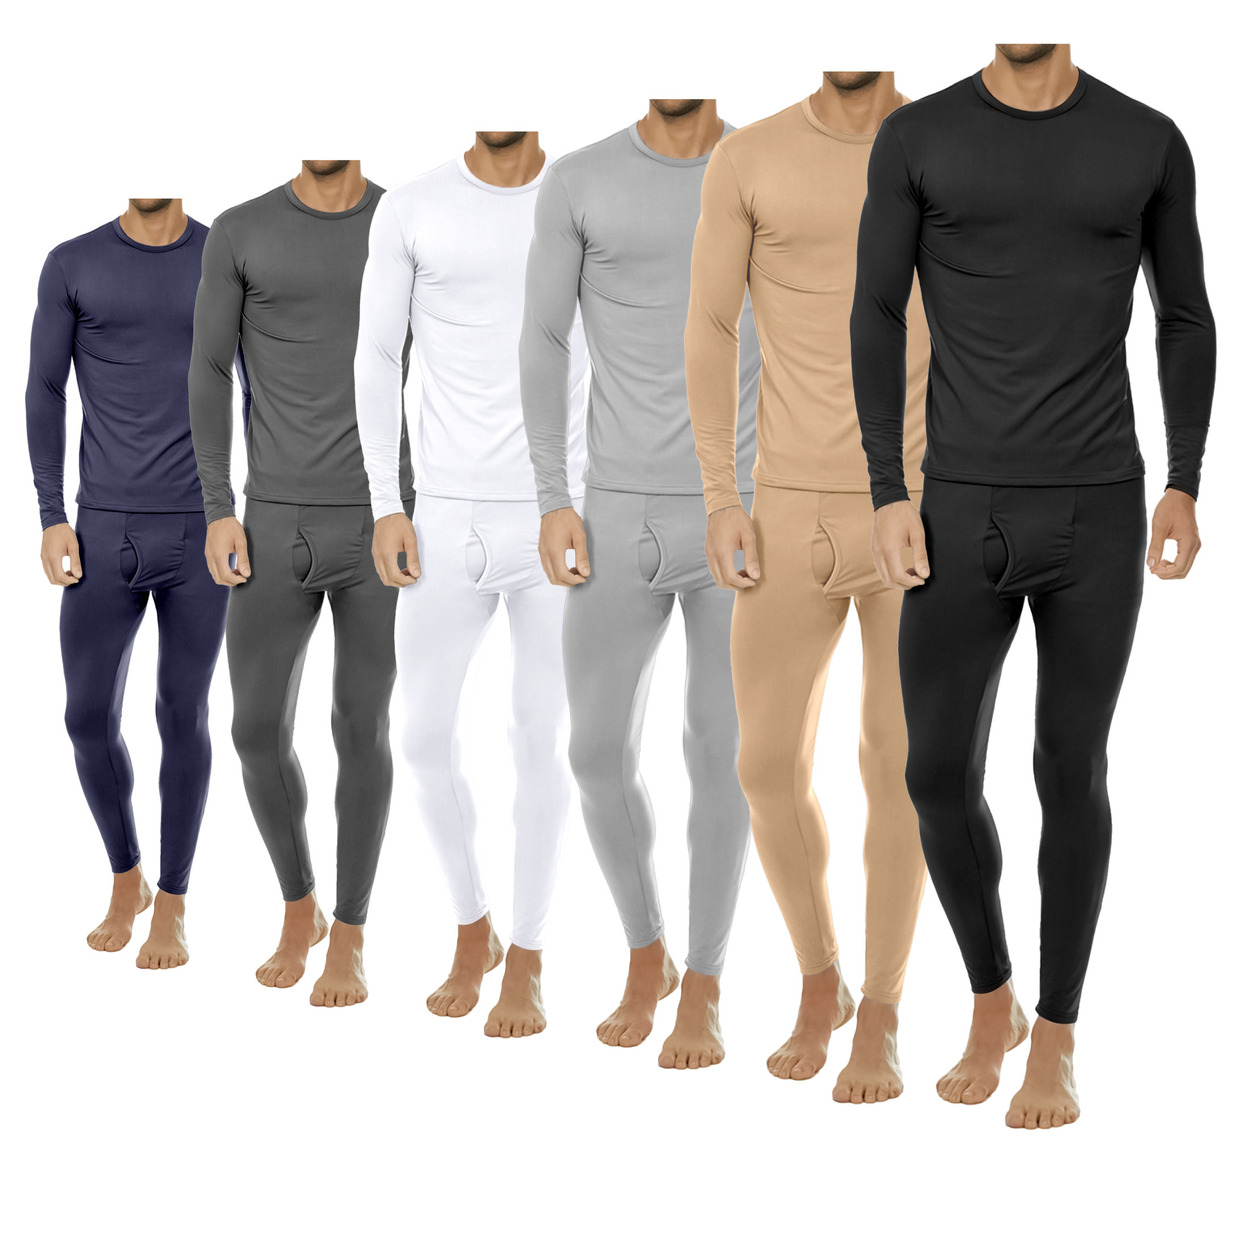 2-Sets: Men's Winter Warm Fleece Lined Thermal Underwear Set For Cold Weather - White&white, Small